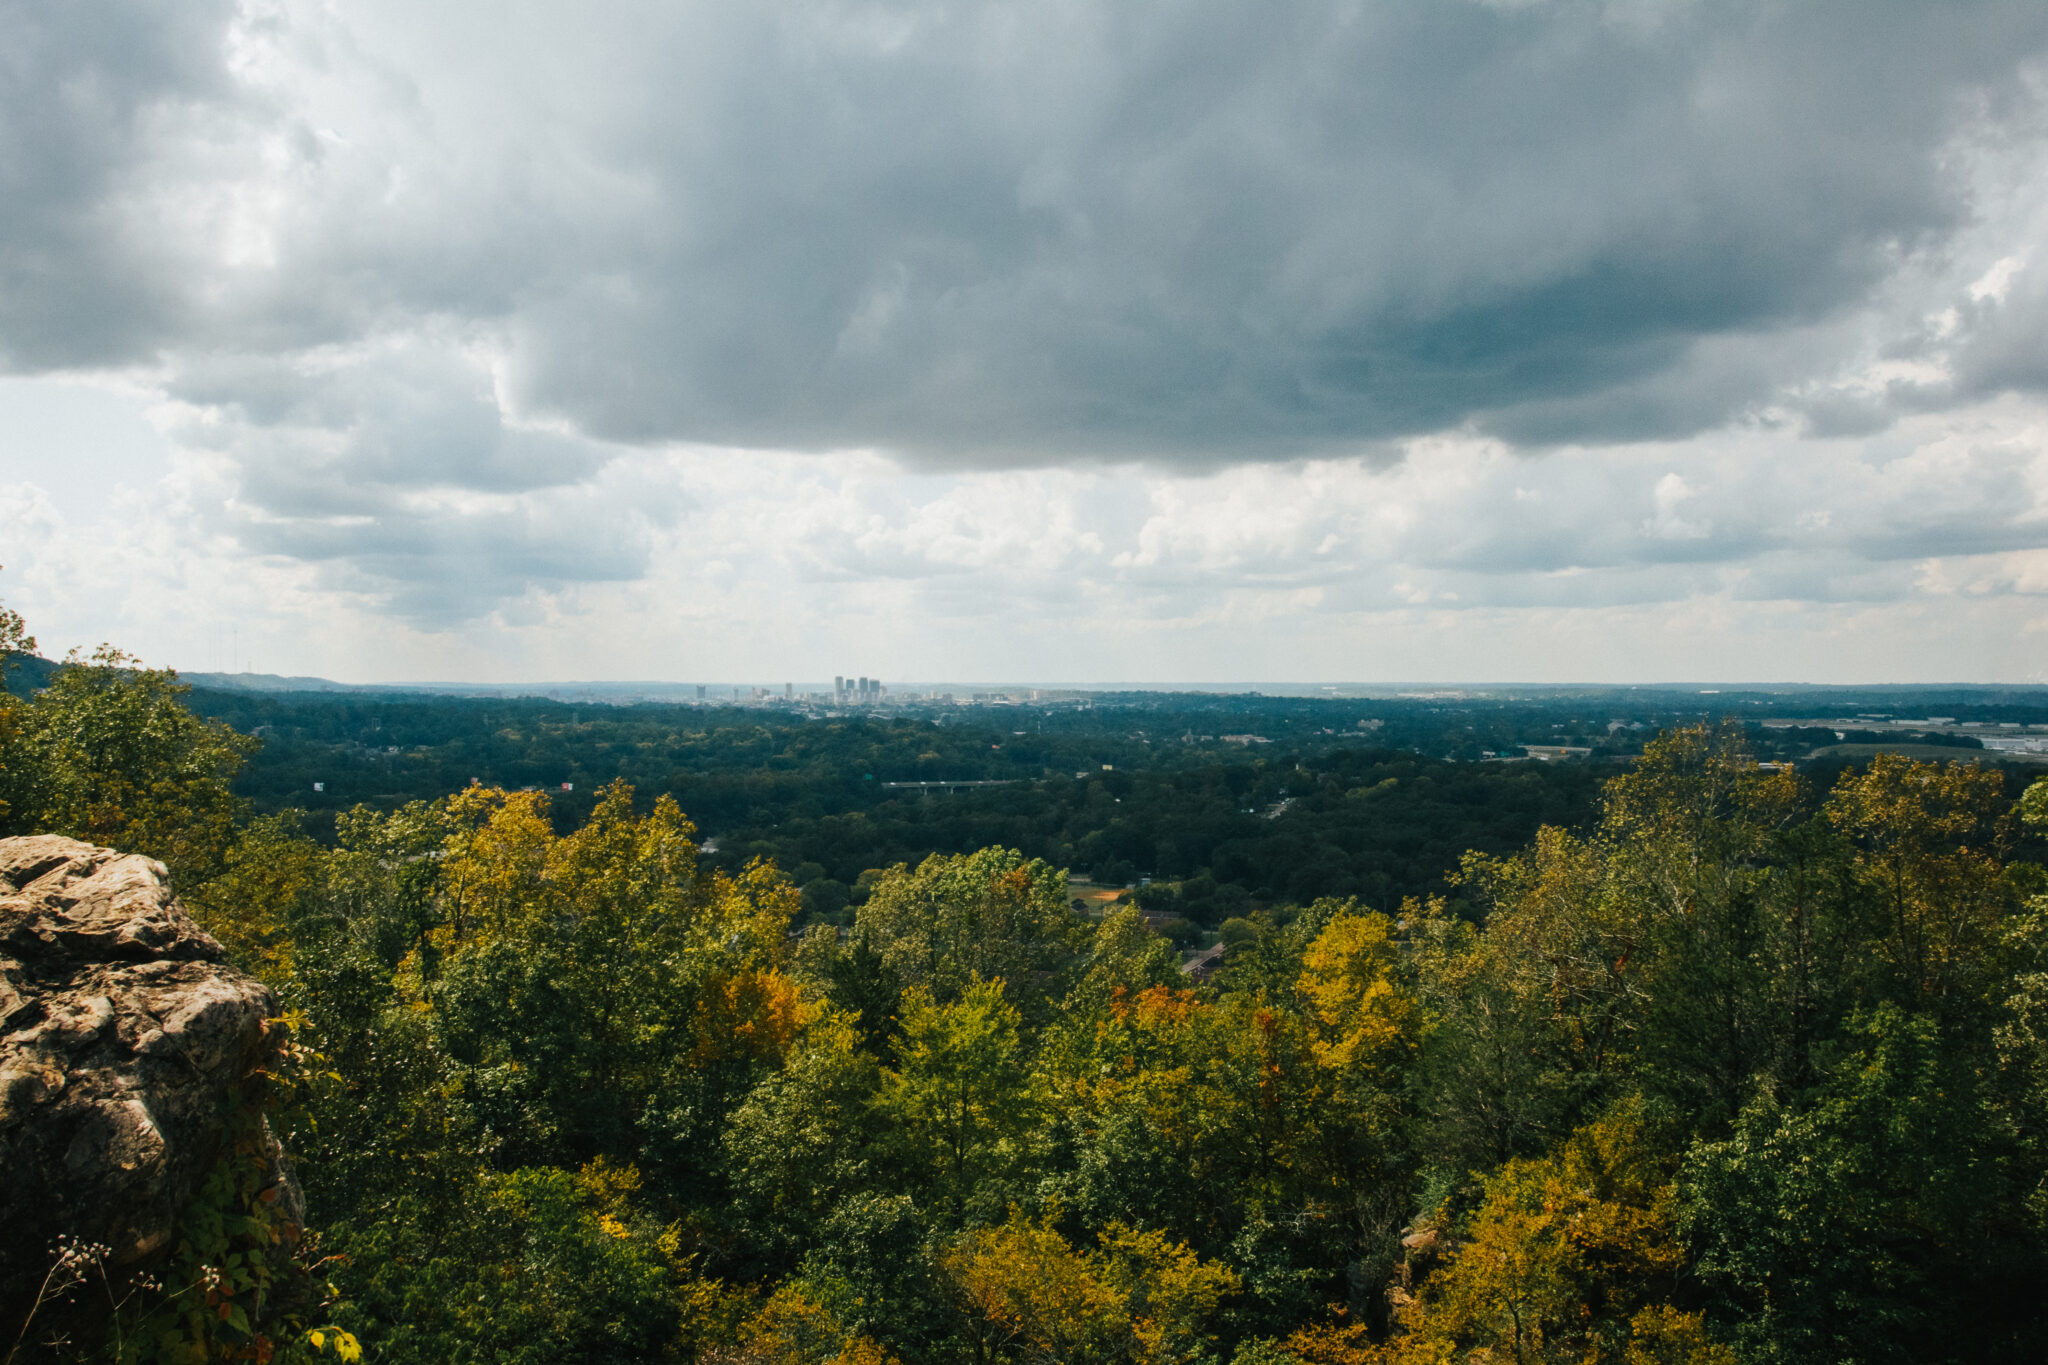 Ruffner Mountain 2020 2 11 proposal spots in Birmingham that will make you say "yes!"